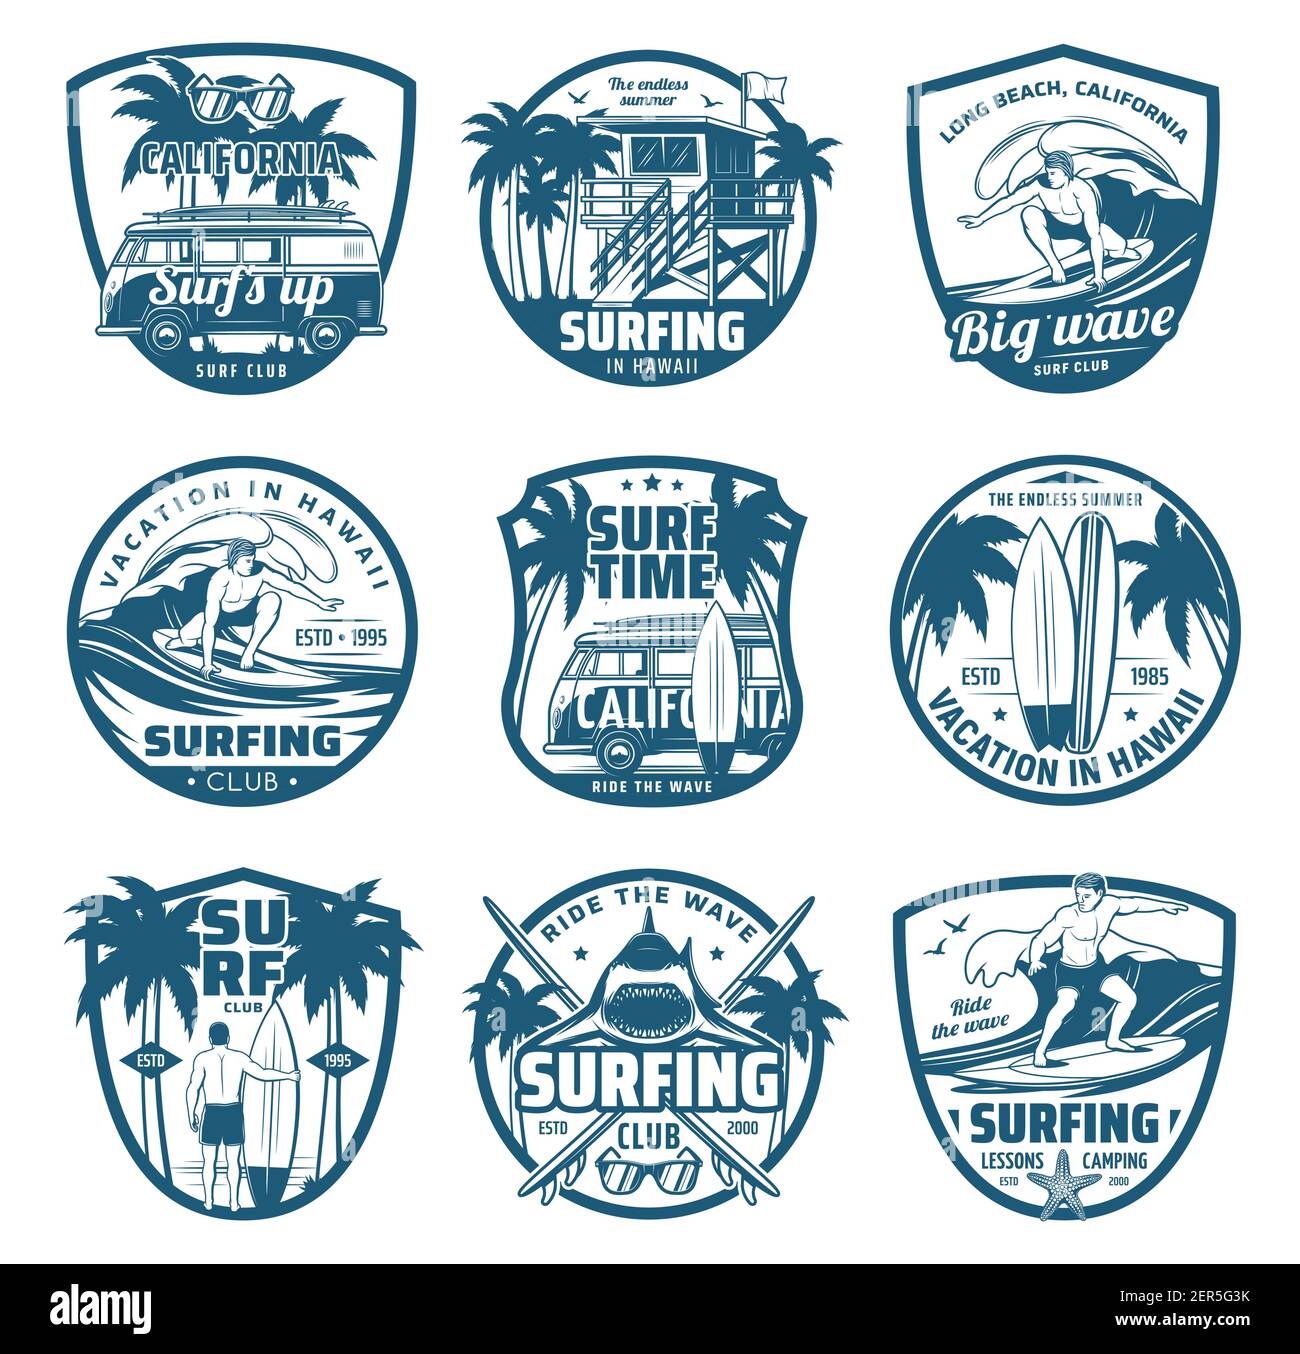 Surfing sport isolated vector icons, surfer club symbols with surf board, sportsman on big wave, traveling van and palm trees. Vacation on Hawaii, Cal Stock Vector